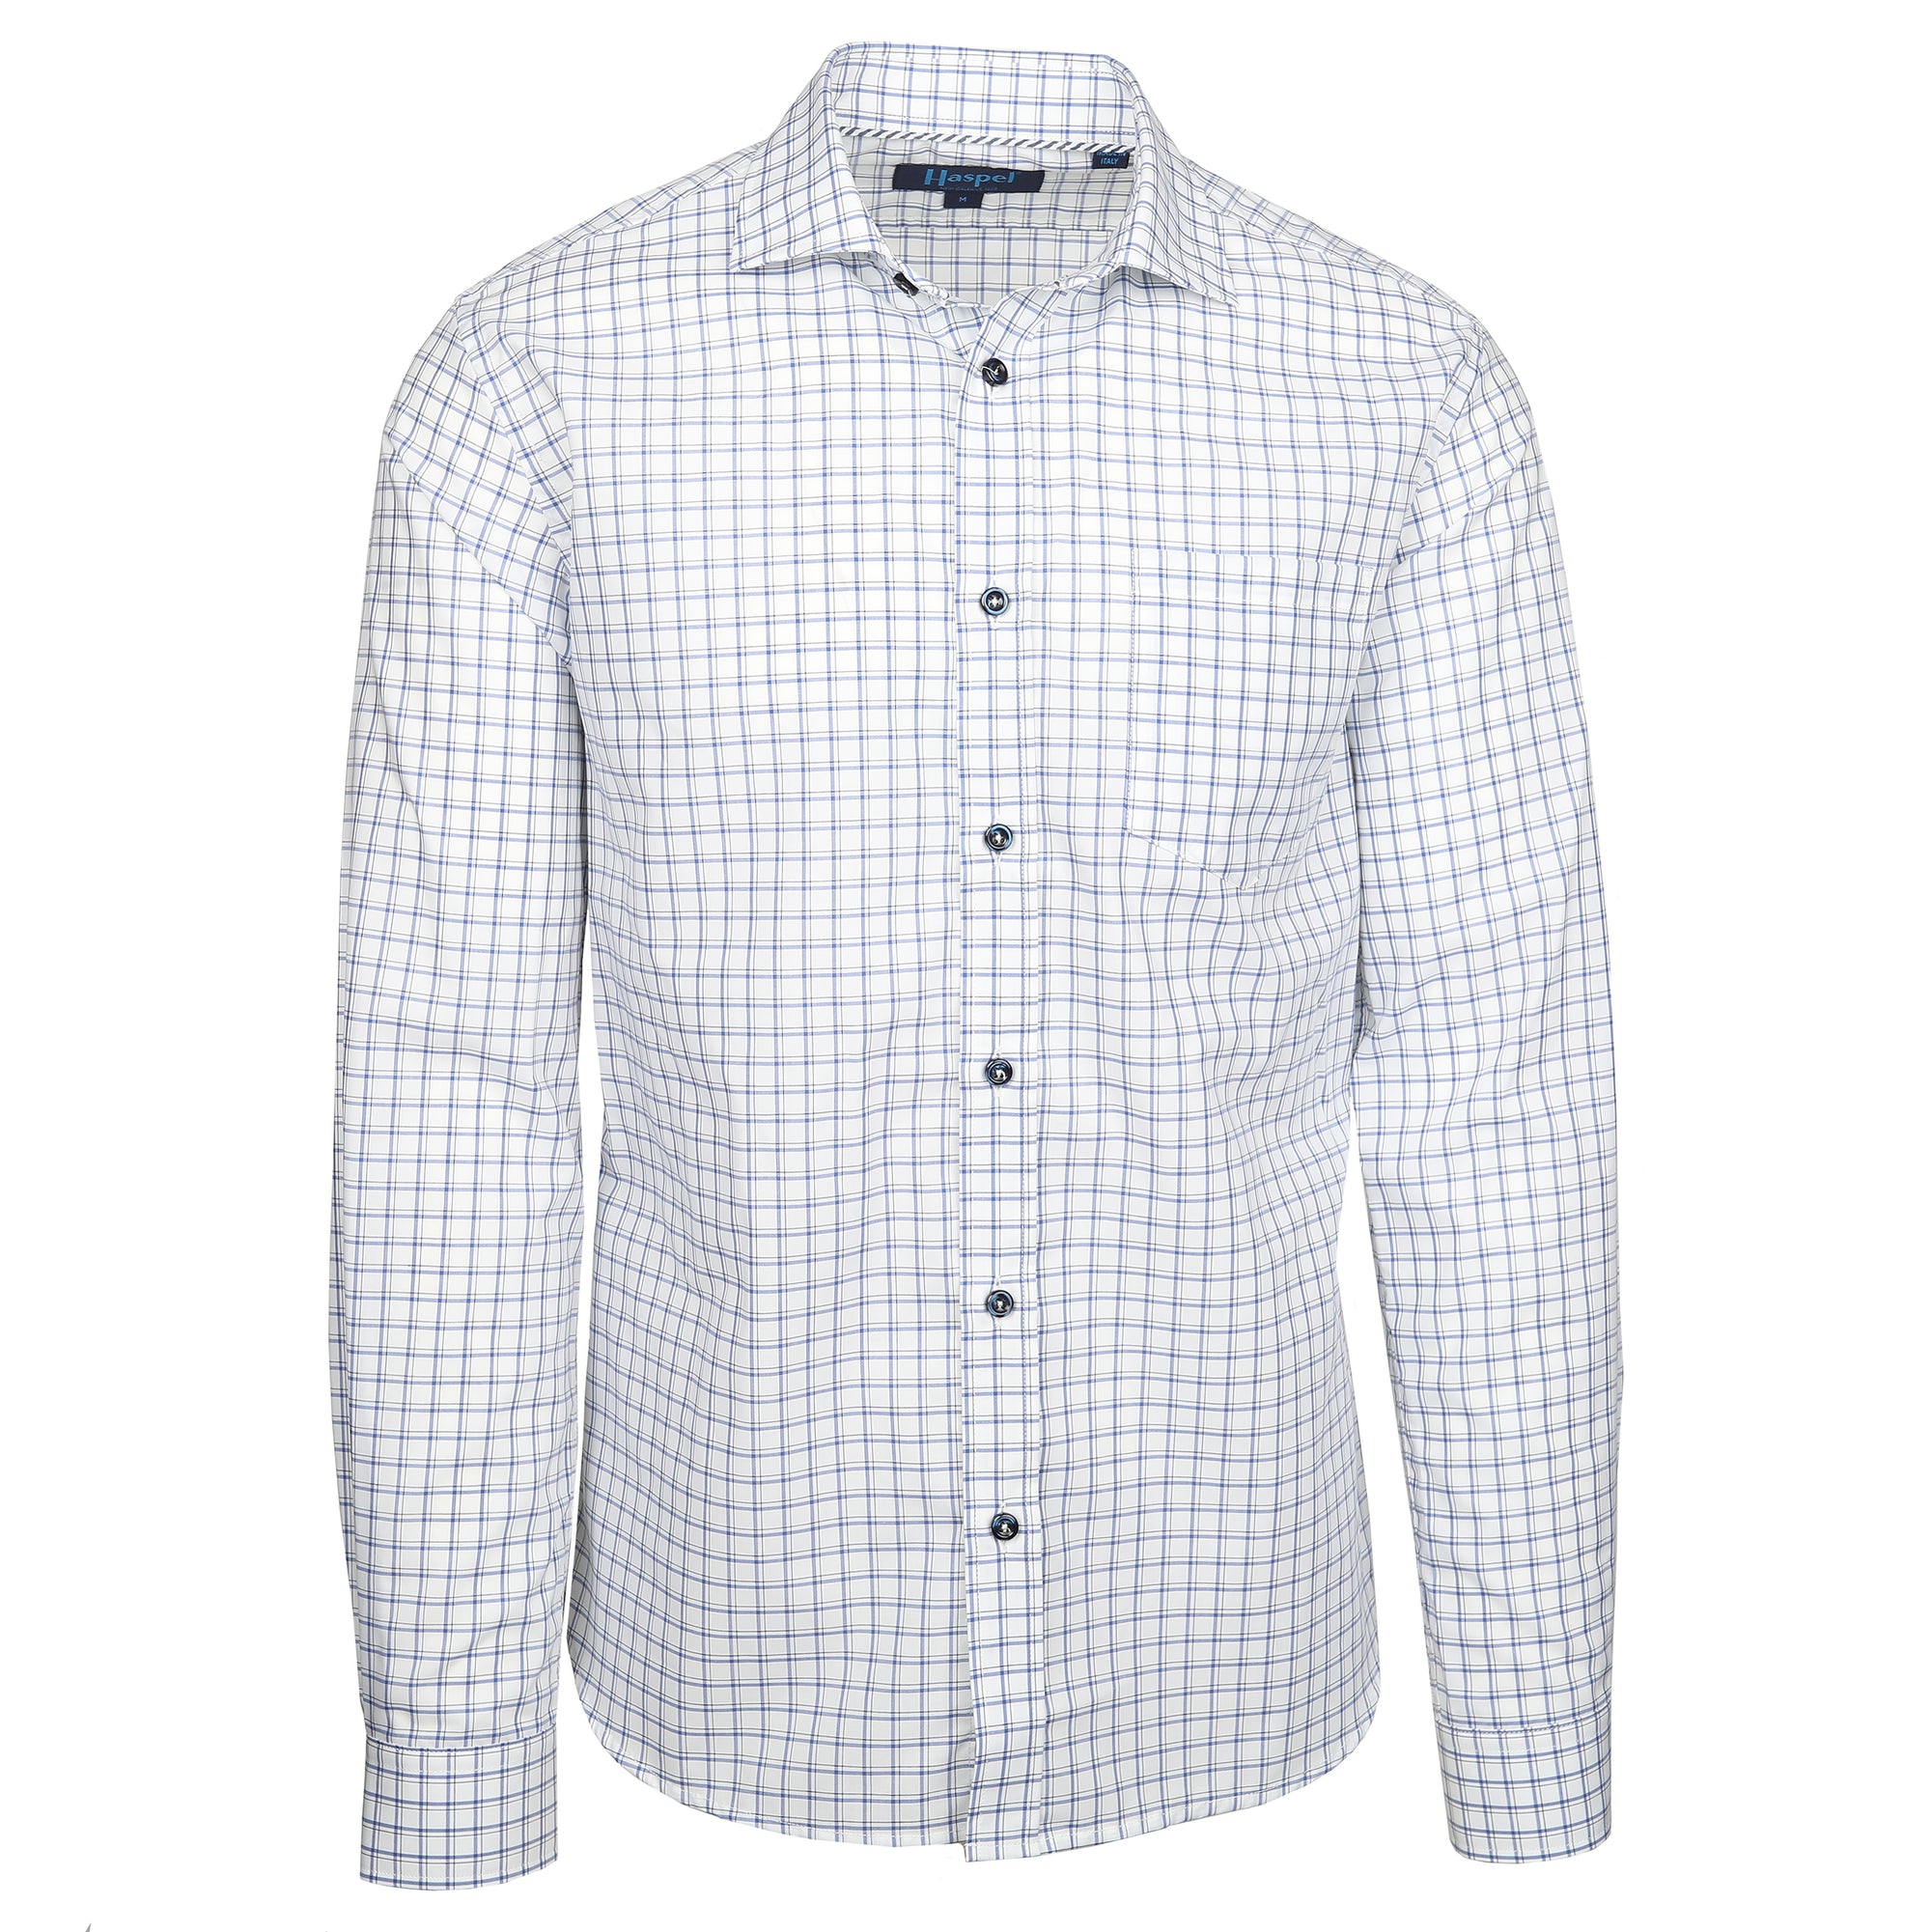 Enjoy the luxury of 100% cotton, Italian made quality, and light blue double check.  100% Cotton • Spread Collar • Long Sleeve • Chest Pocket • Machine Washable • Made in Italy 